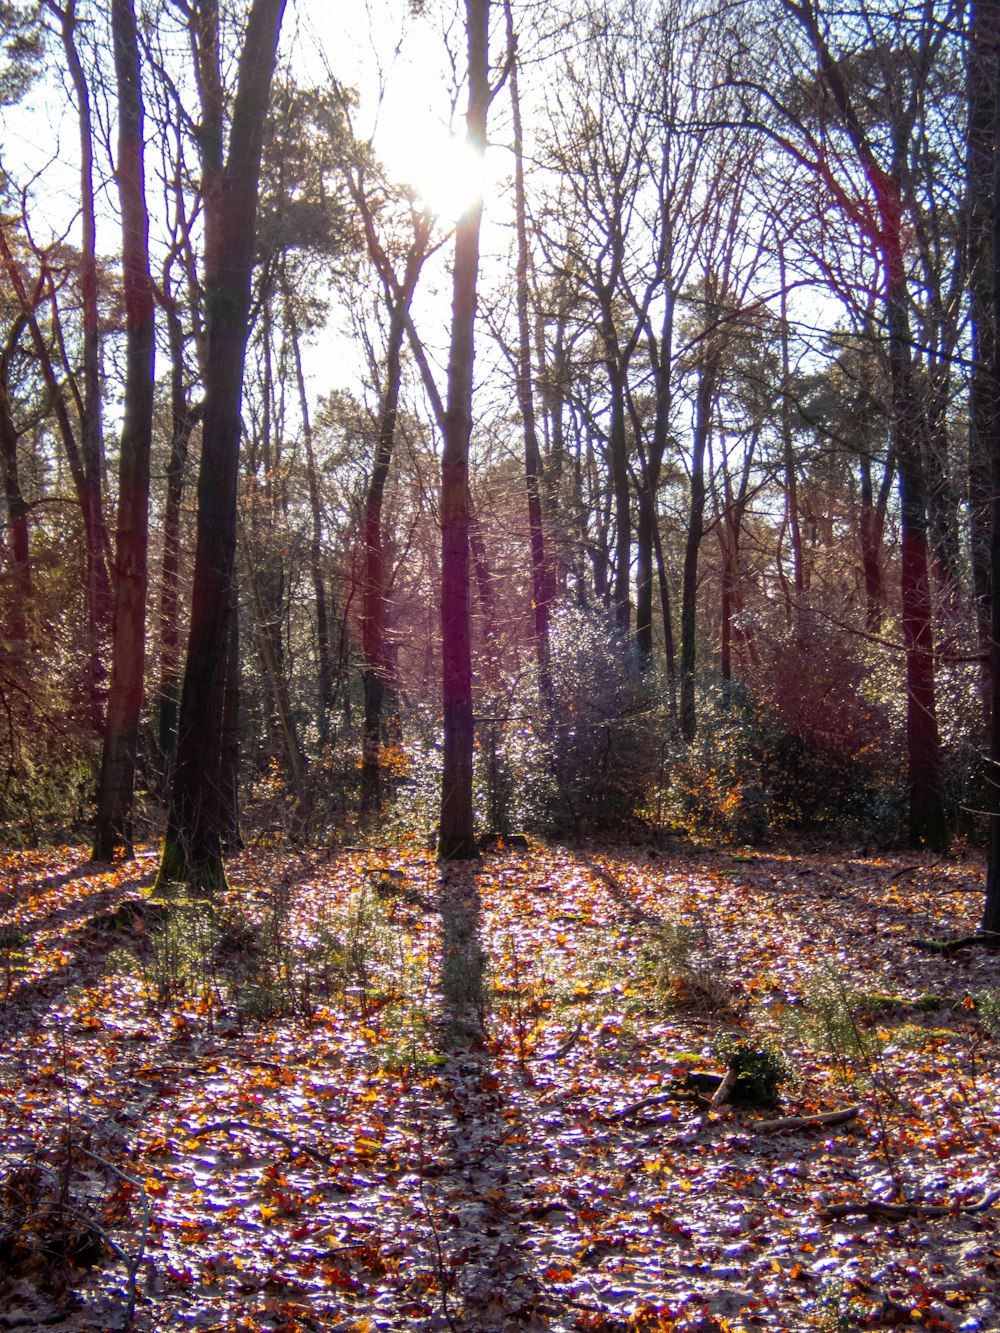 the sun shines through the trees in the woods